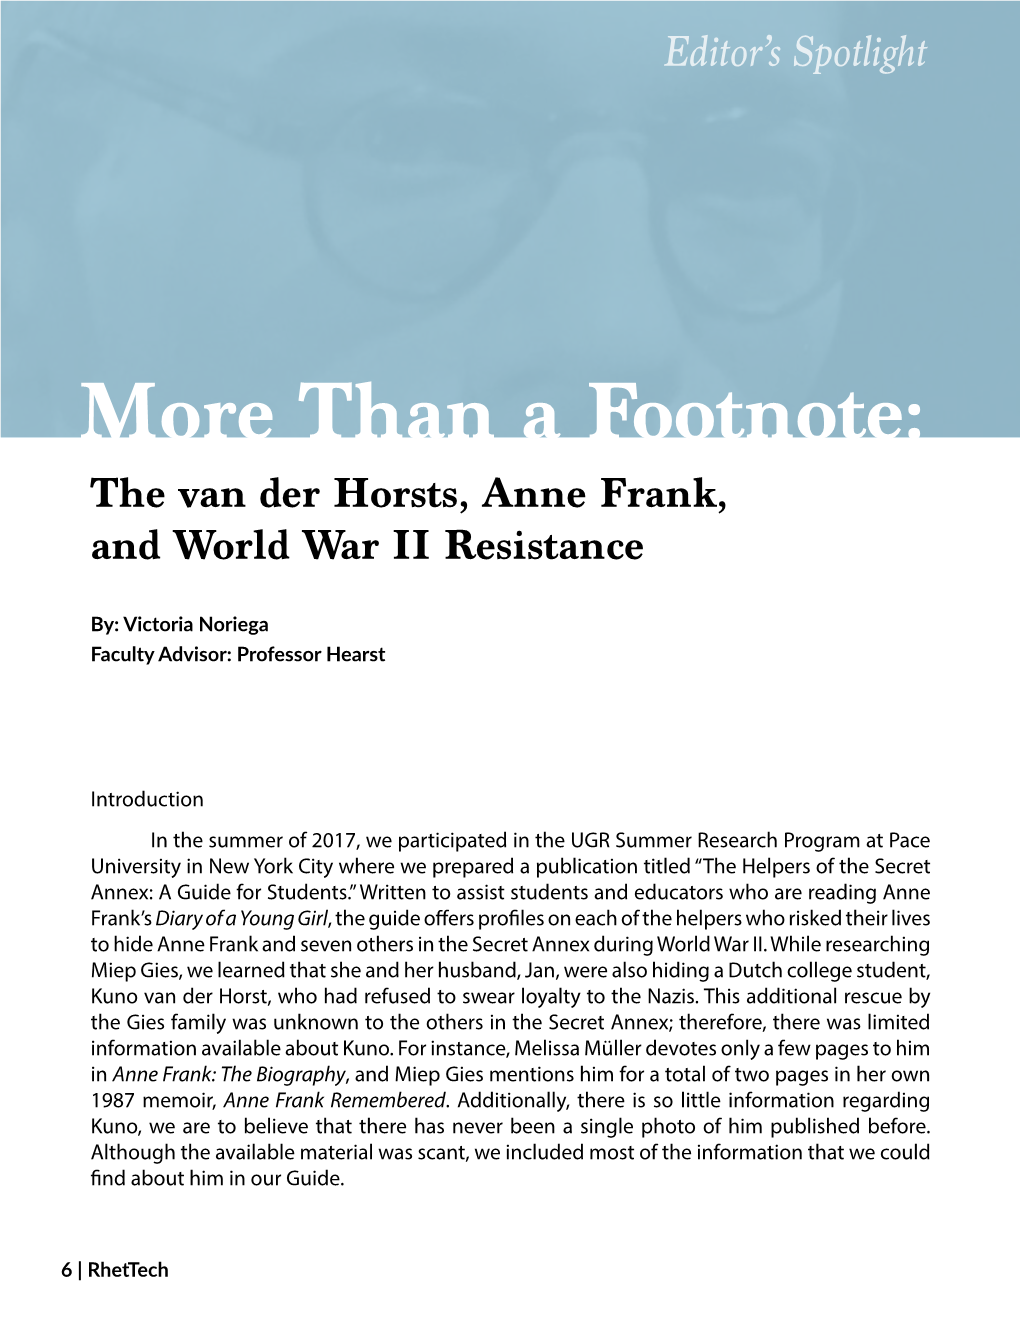 More Than a Footnote: the Van Der Horsts, Anne Frank, and World War II Resistance